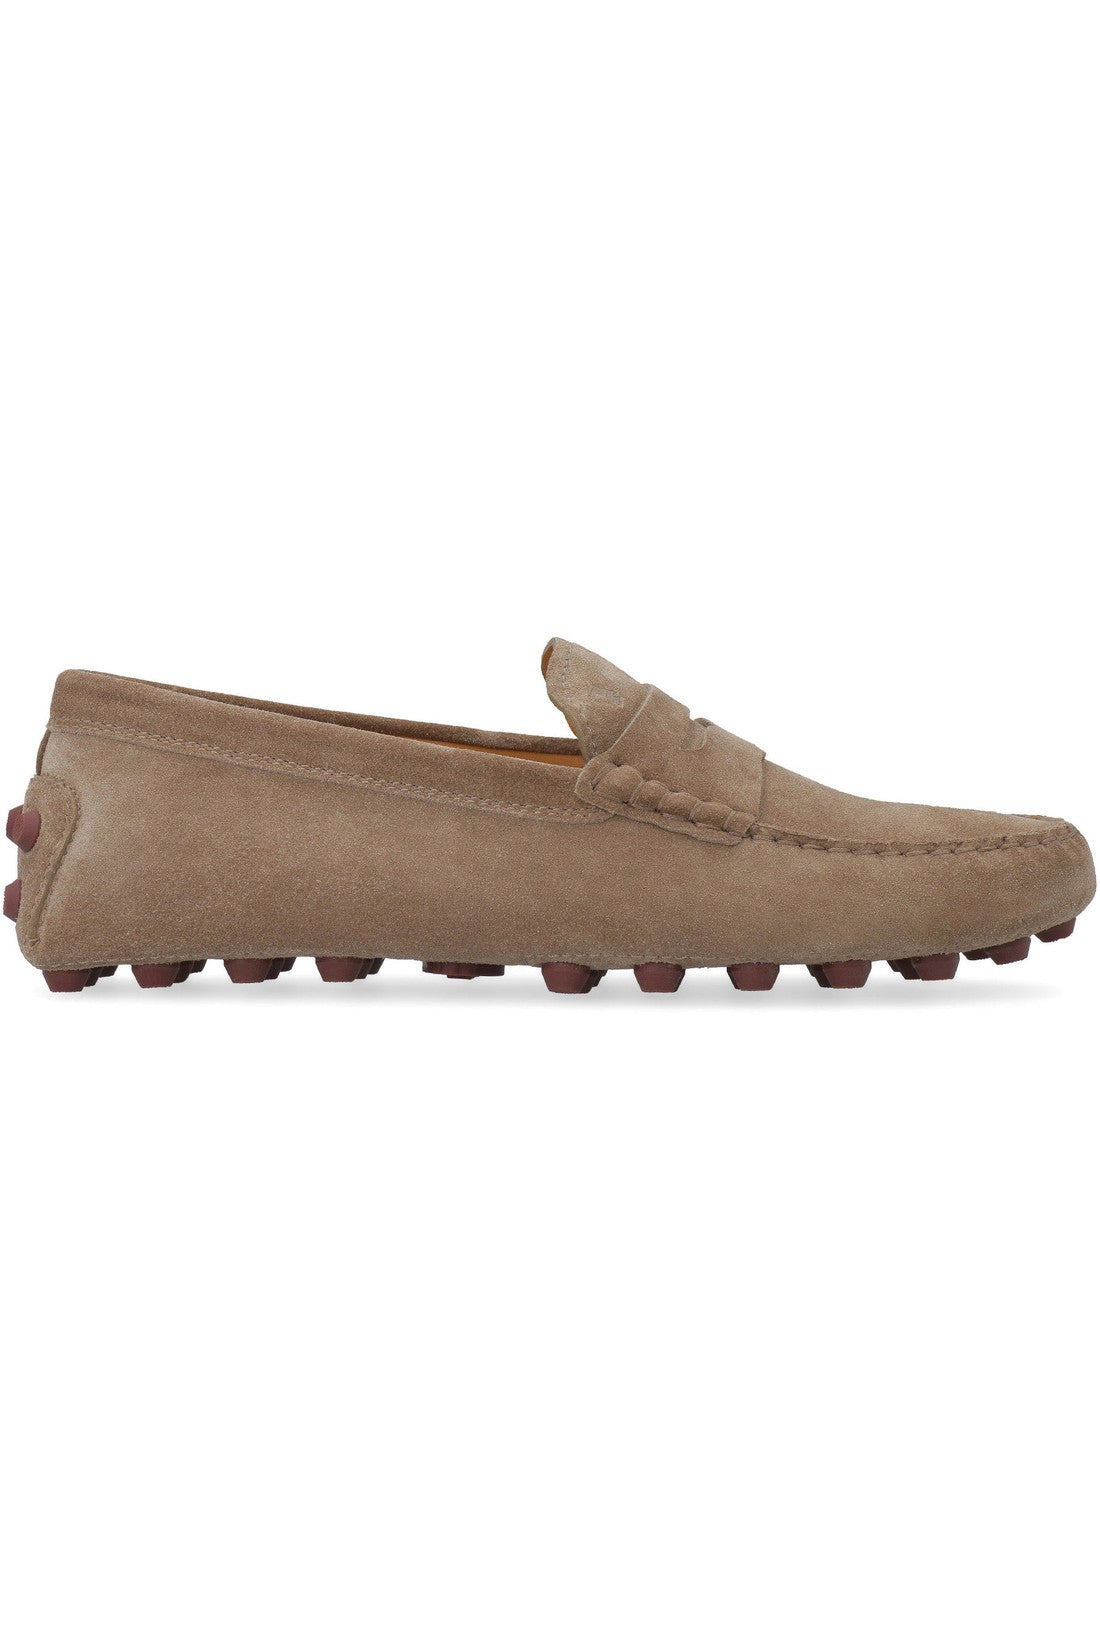 Tod's-OUTLET-SALE-Gommino Bubble suede loafers-ARCHIVIST